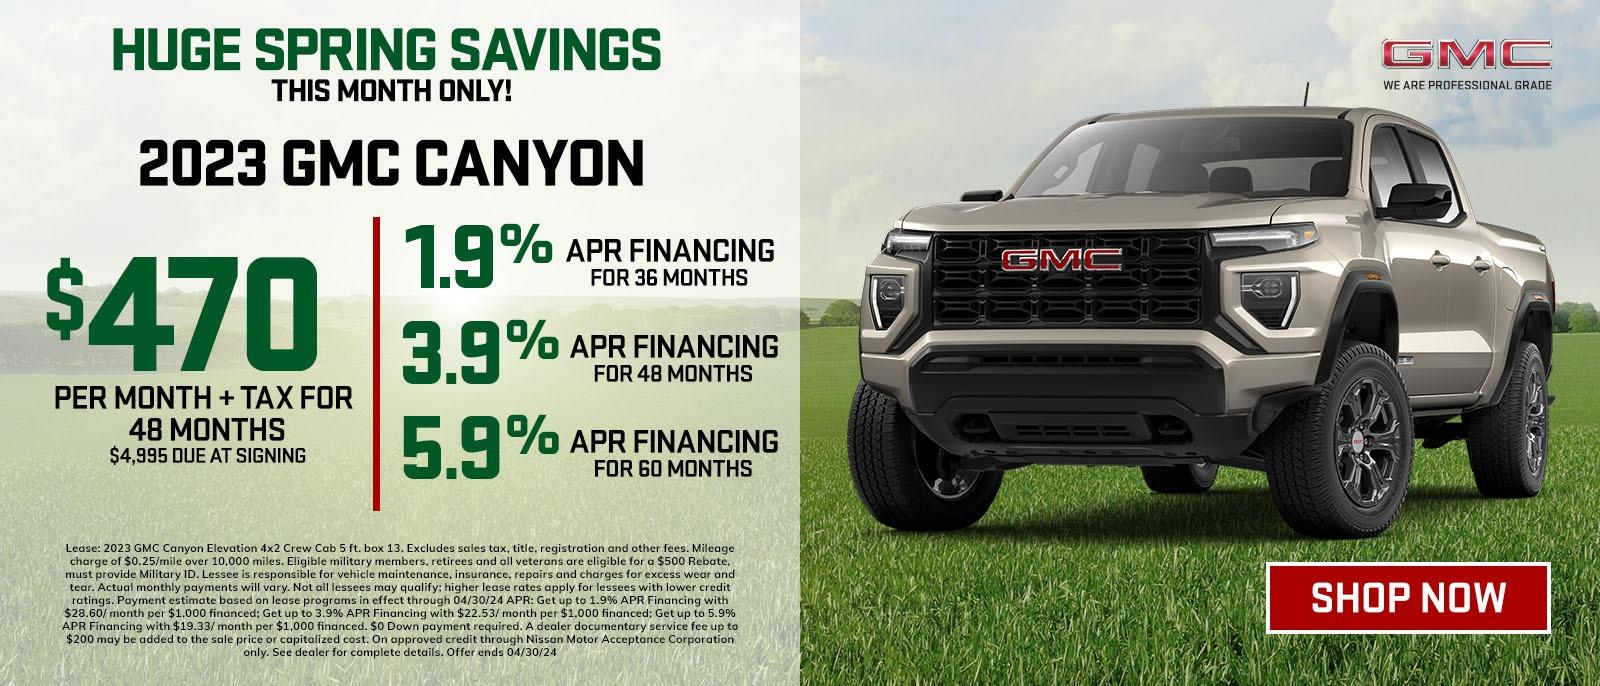 HUGE SPRING SAVINGS 
THIS MONTH ONLY
2023 GMC CANYON
$470 PER MONTH + TAX FOR 48 MONTHS , $4,995 AT SIGNING 
1.9% APR FINANCING FOR 36 MONTHS
3.9%APR FINANCING FOR 48 MONTHS
3.9%APR FINANCING FOR 60 MONTHS
GET UPTO $8,000 IN TOTAL SAVING